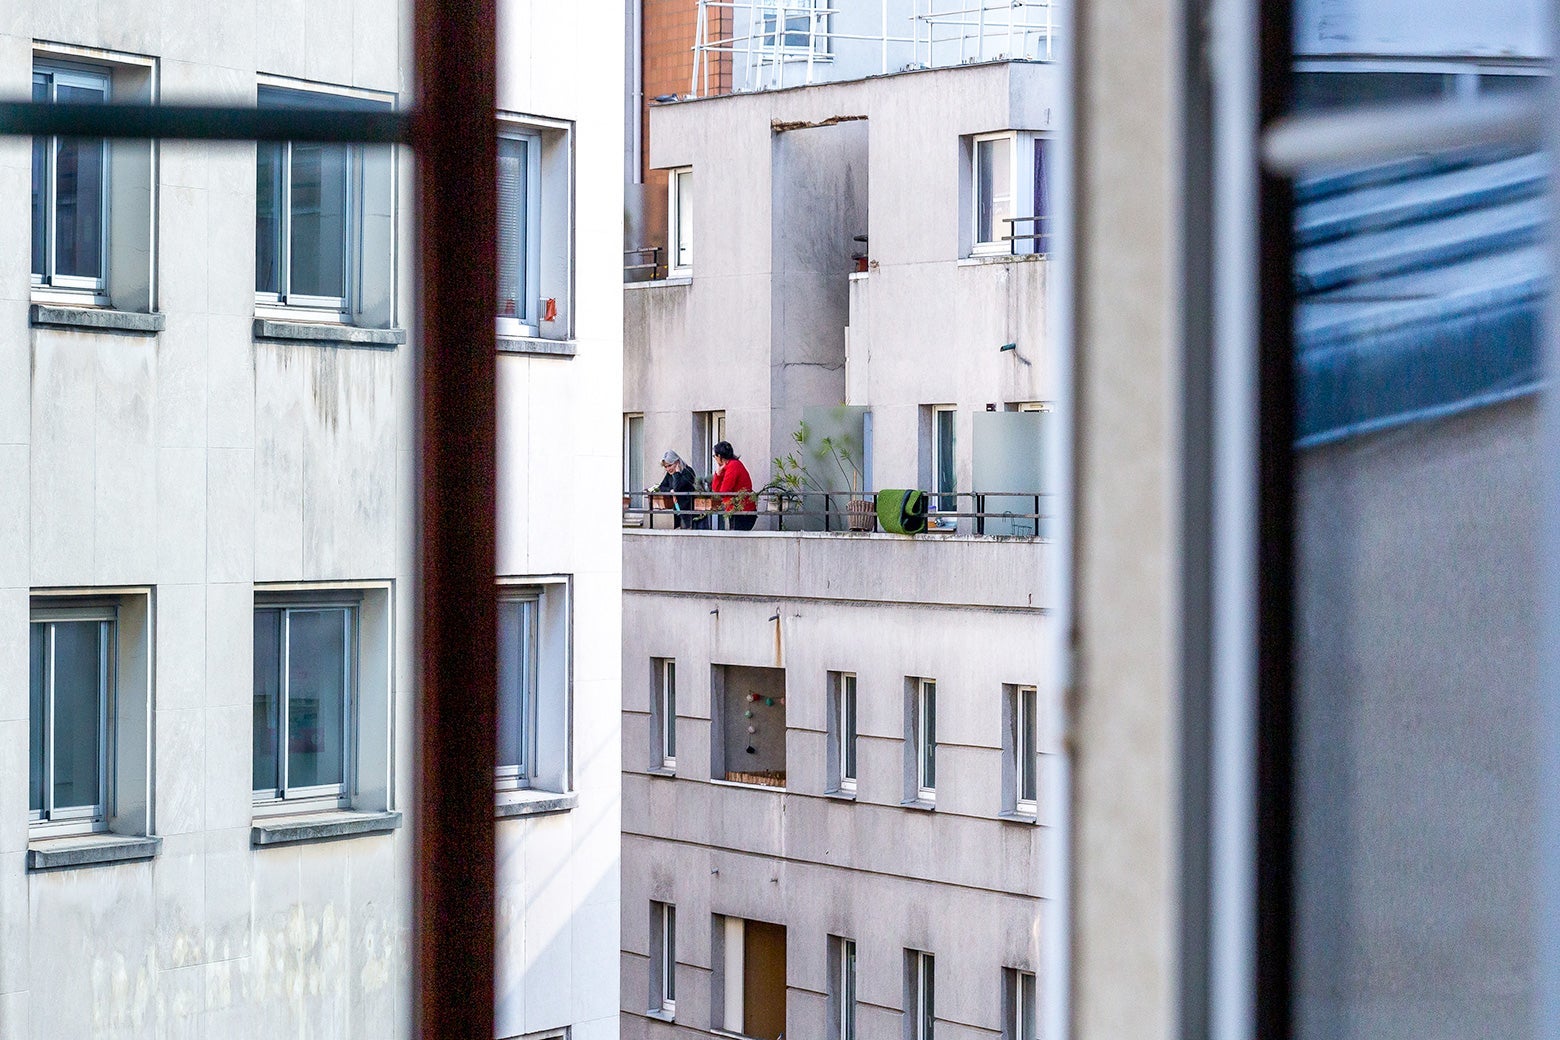 A Paris apartment complex seen out a window, with two people standing on a balcony.